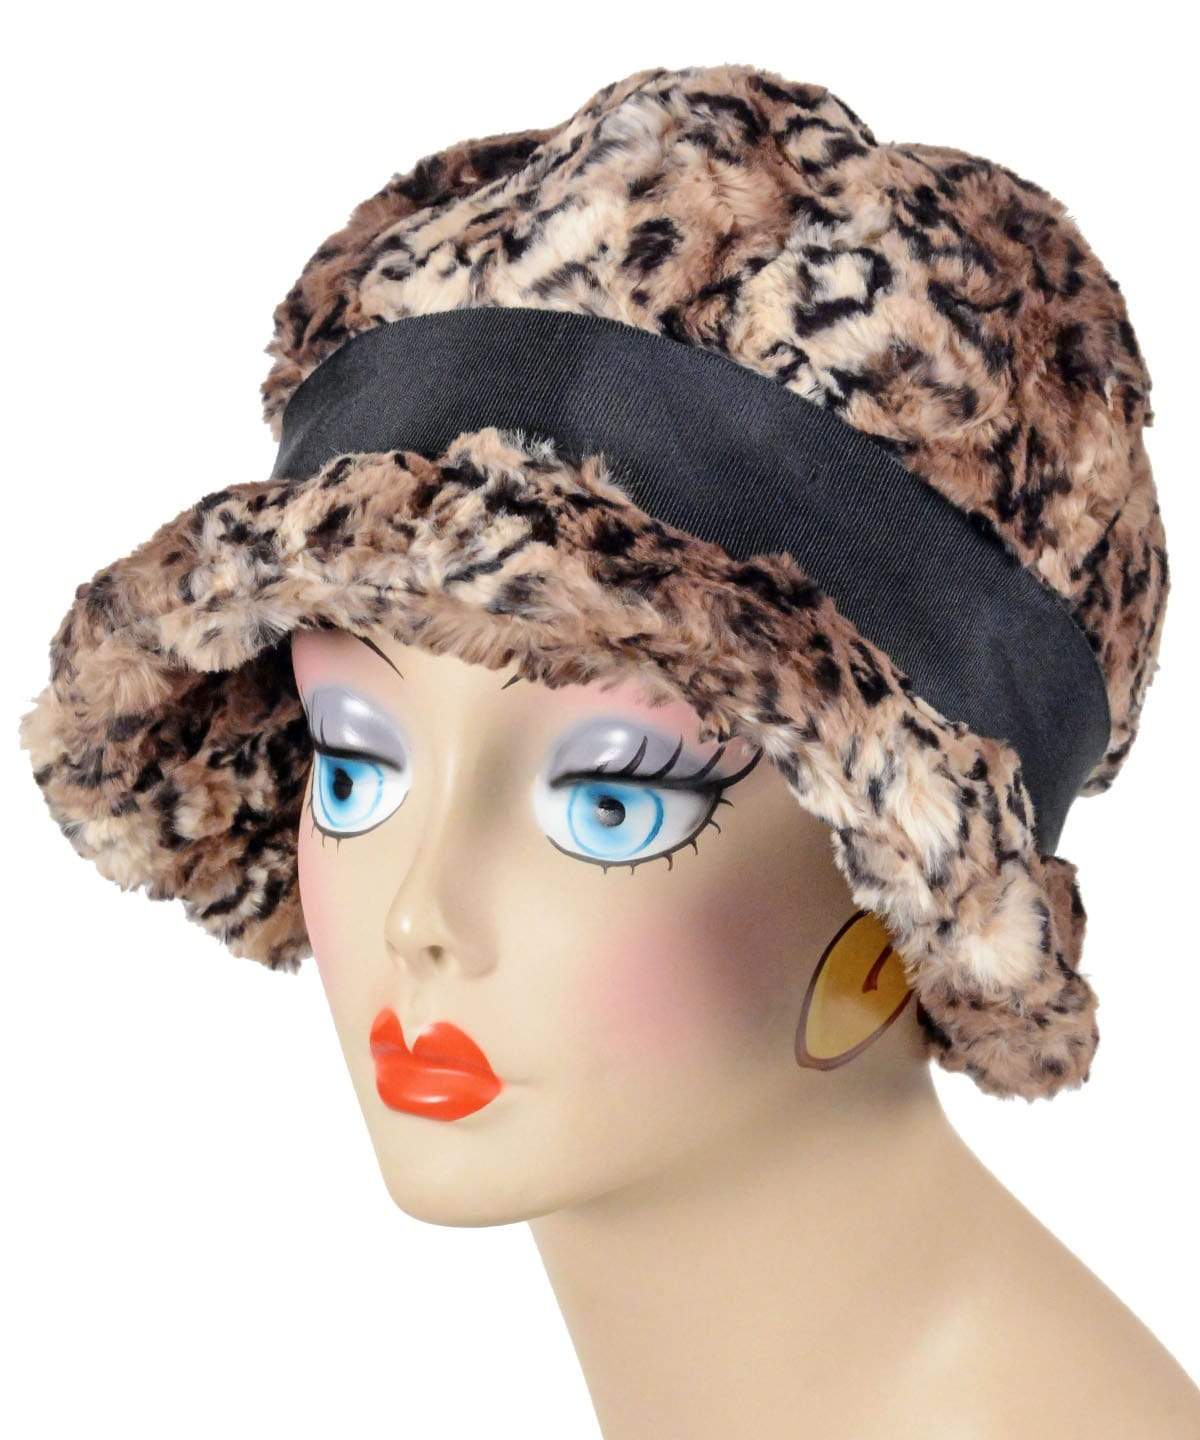 Product Shot of Grace Cloche 1920s Style Hat in Carpathian Lynx animal print Faux Fur with Black Grosgrain Band  and Black Velvet Roses Brooch | By Pandemonium Millinery | Seattle WA USA